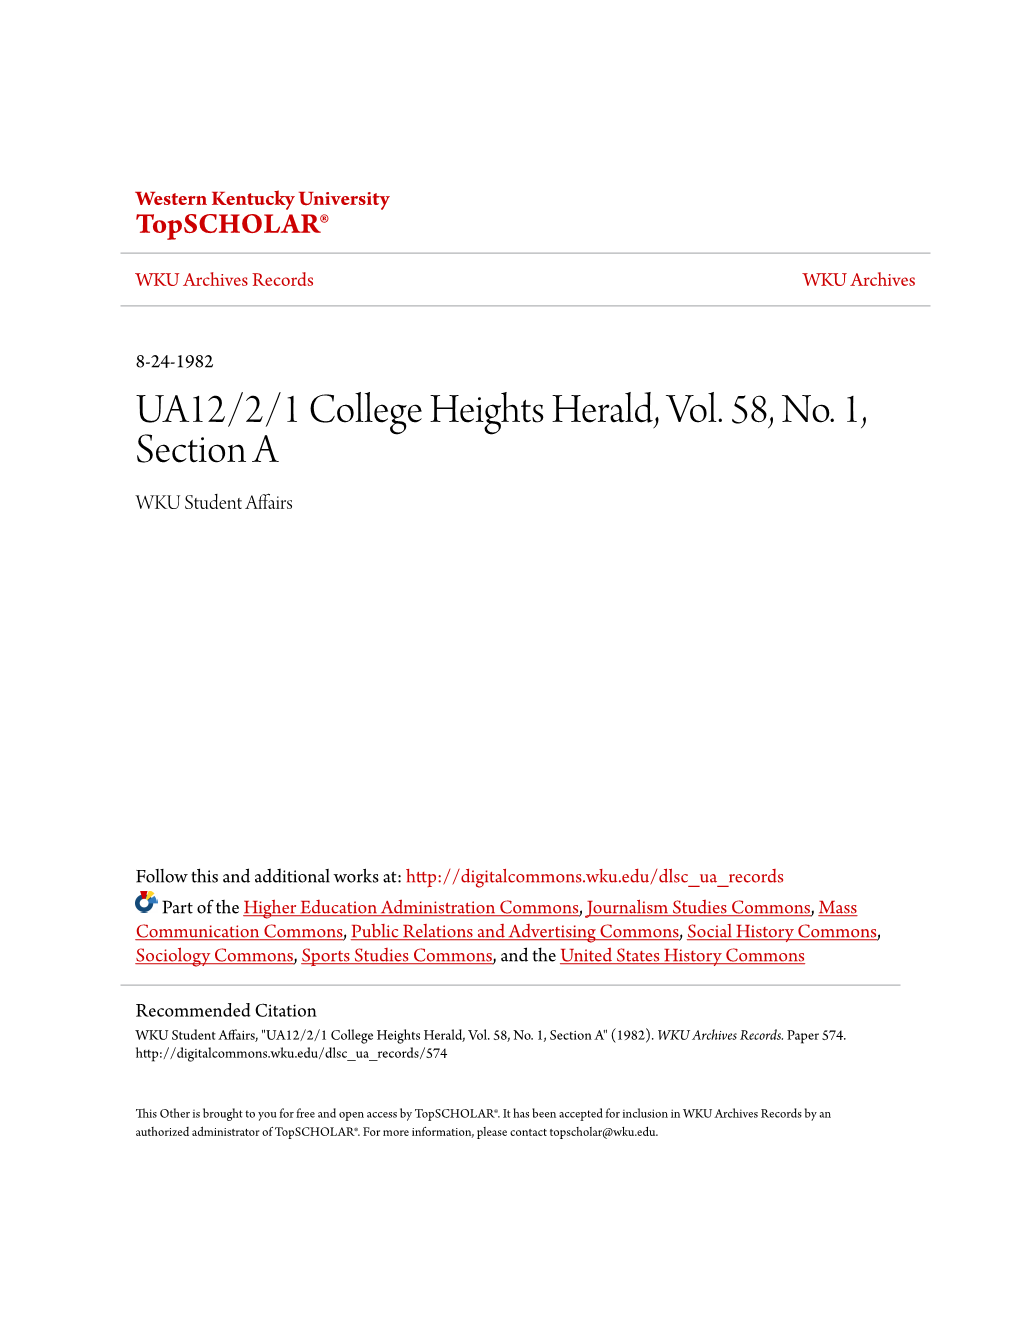 UA12/2/1 College Heights Herald, Vol. 58, No. 1, Section a WKU Student Affairs